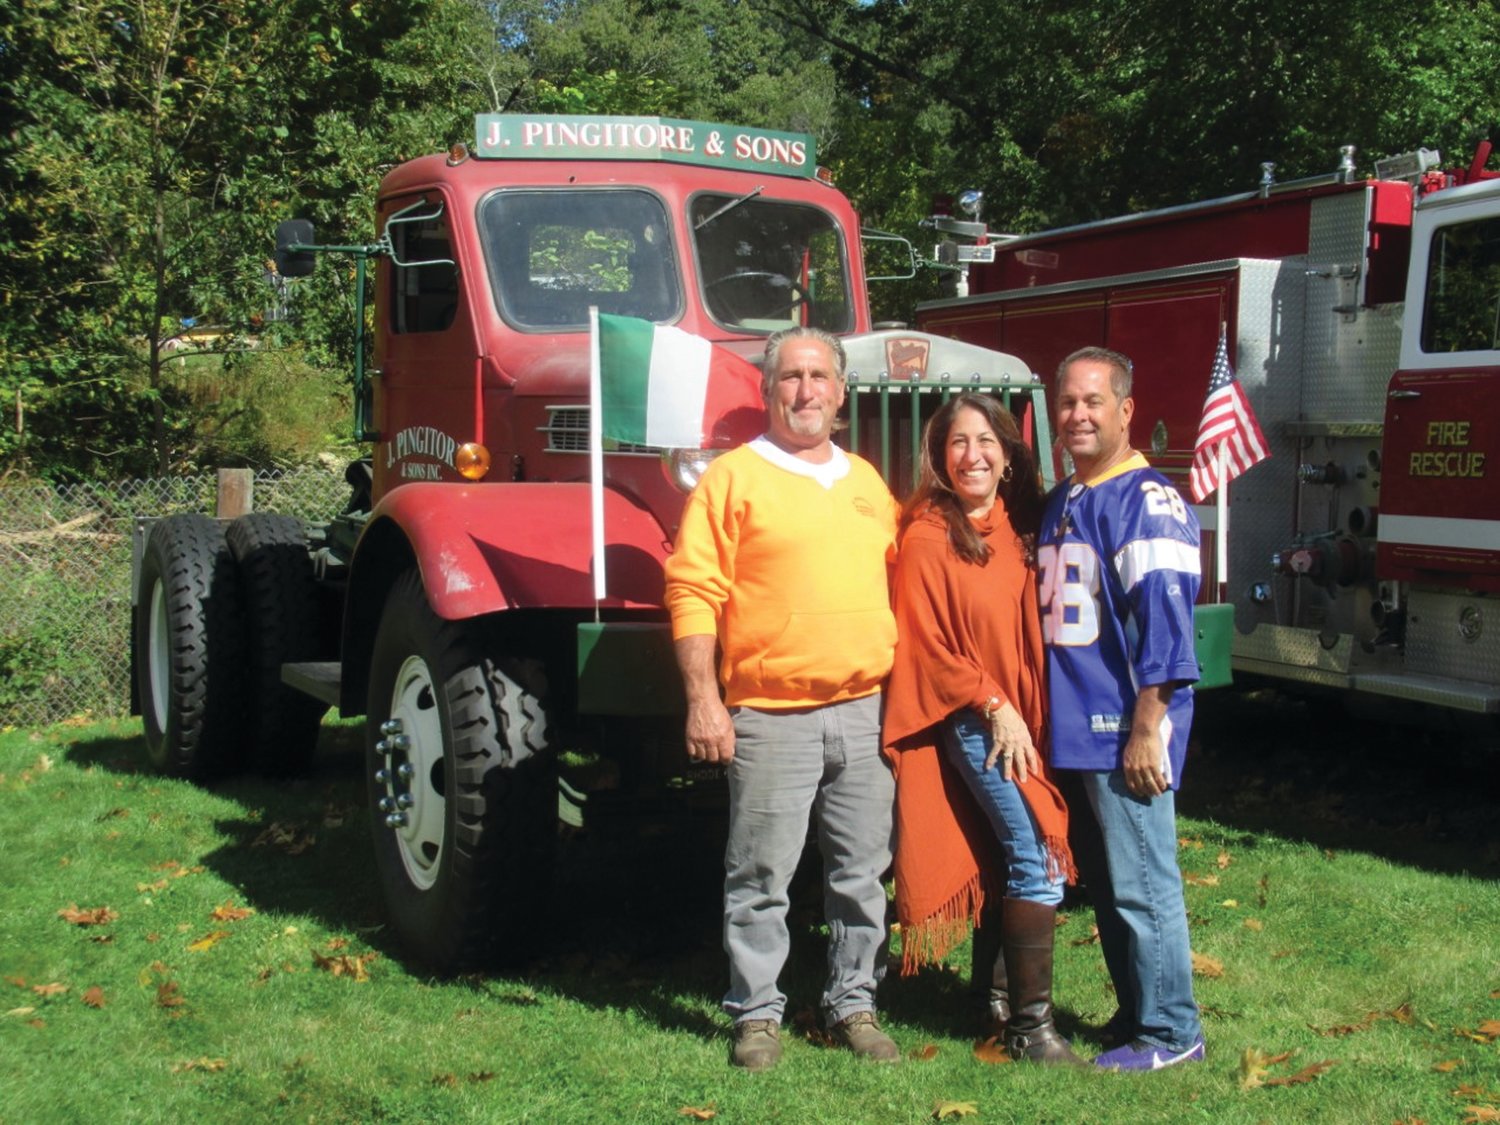 MIGHTY MEMORIAL: This is just one of the vintage vehicles — a 1952 Sterling White HB Tractor that the late Joseph Pingitore III owned and operated and will be on display throughout Sunday’s Ocean State Vintage Haulers 28th Annual Antique Truck Show in Johnston. Here he poses for a photo with sister Francine Pingitore and brother David David Pingitore, a long-time Johnston Firefighter who serves as Secretary-Treasurer of Local 1350, at a past event.